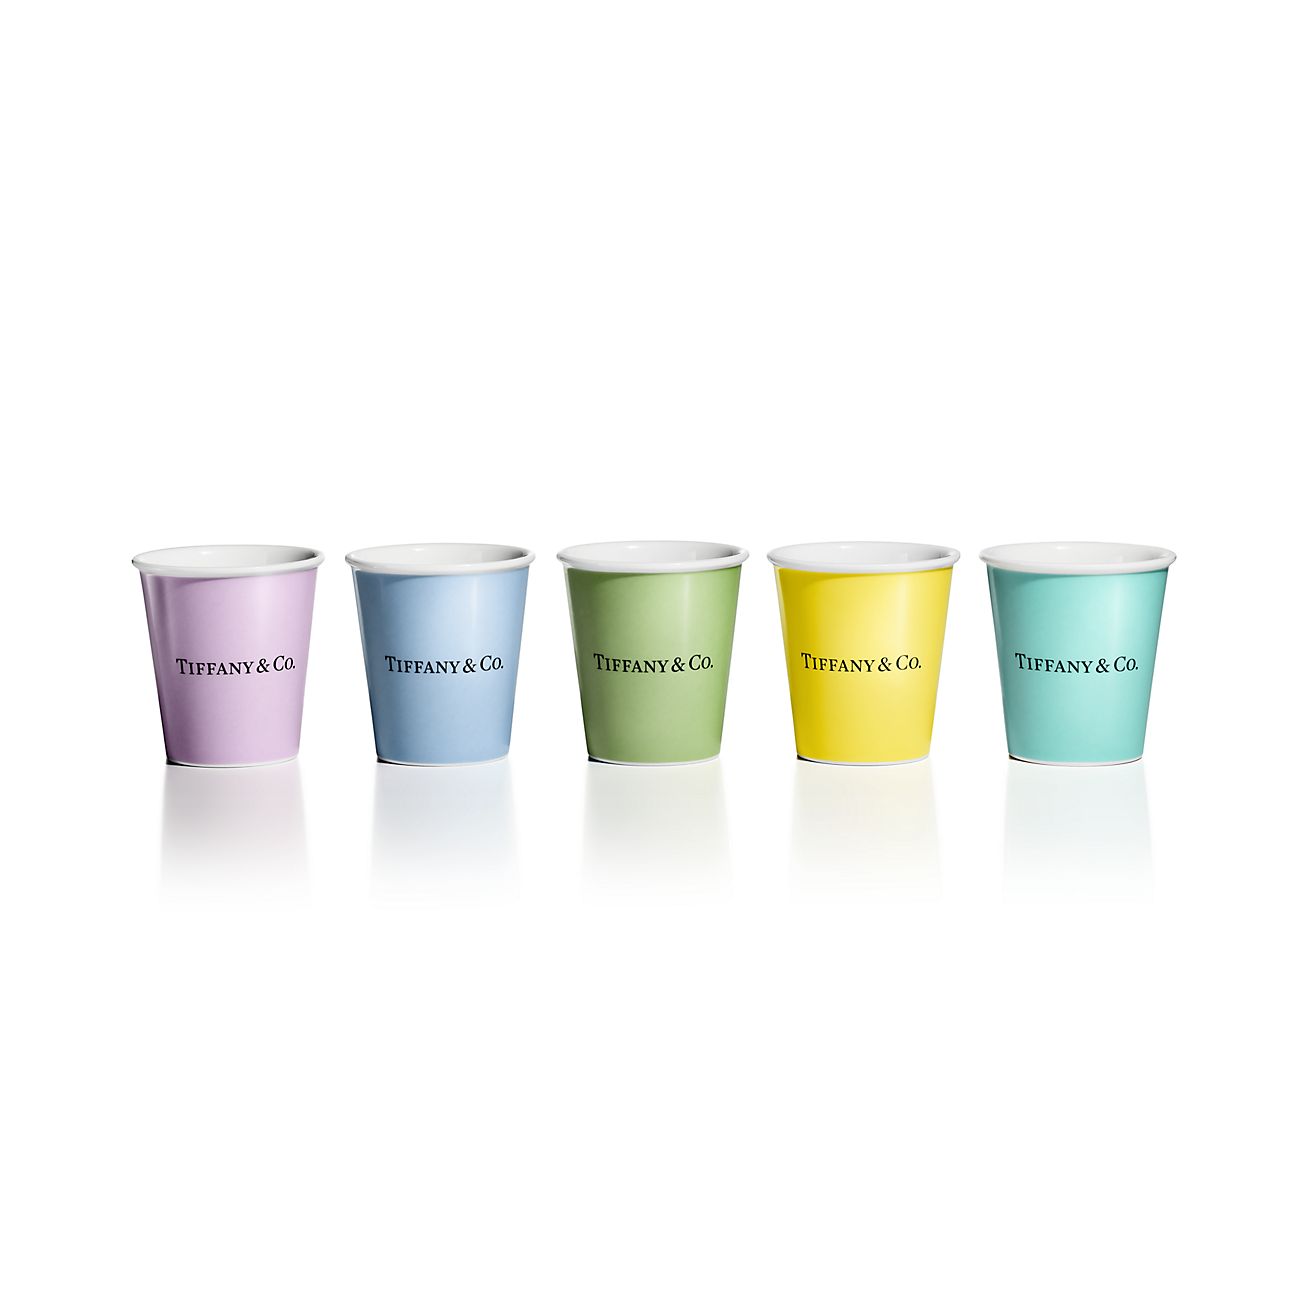 Everyday Objects Tiffany Coffee Cups in Bone China, Set of Five